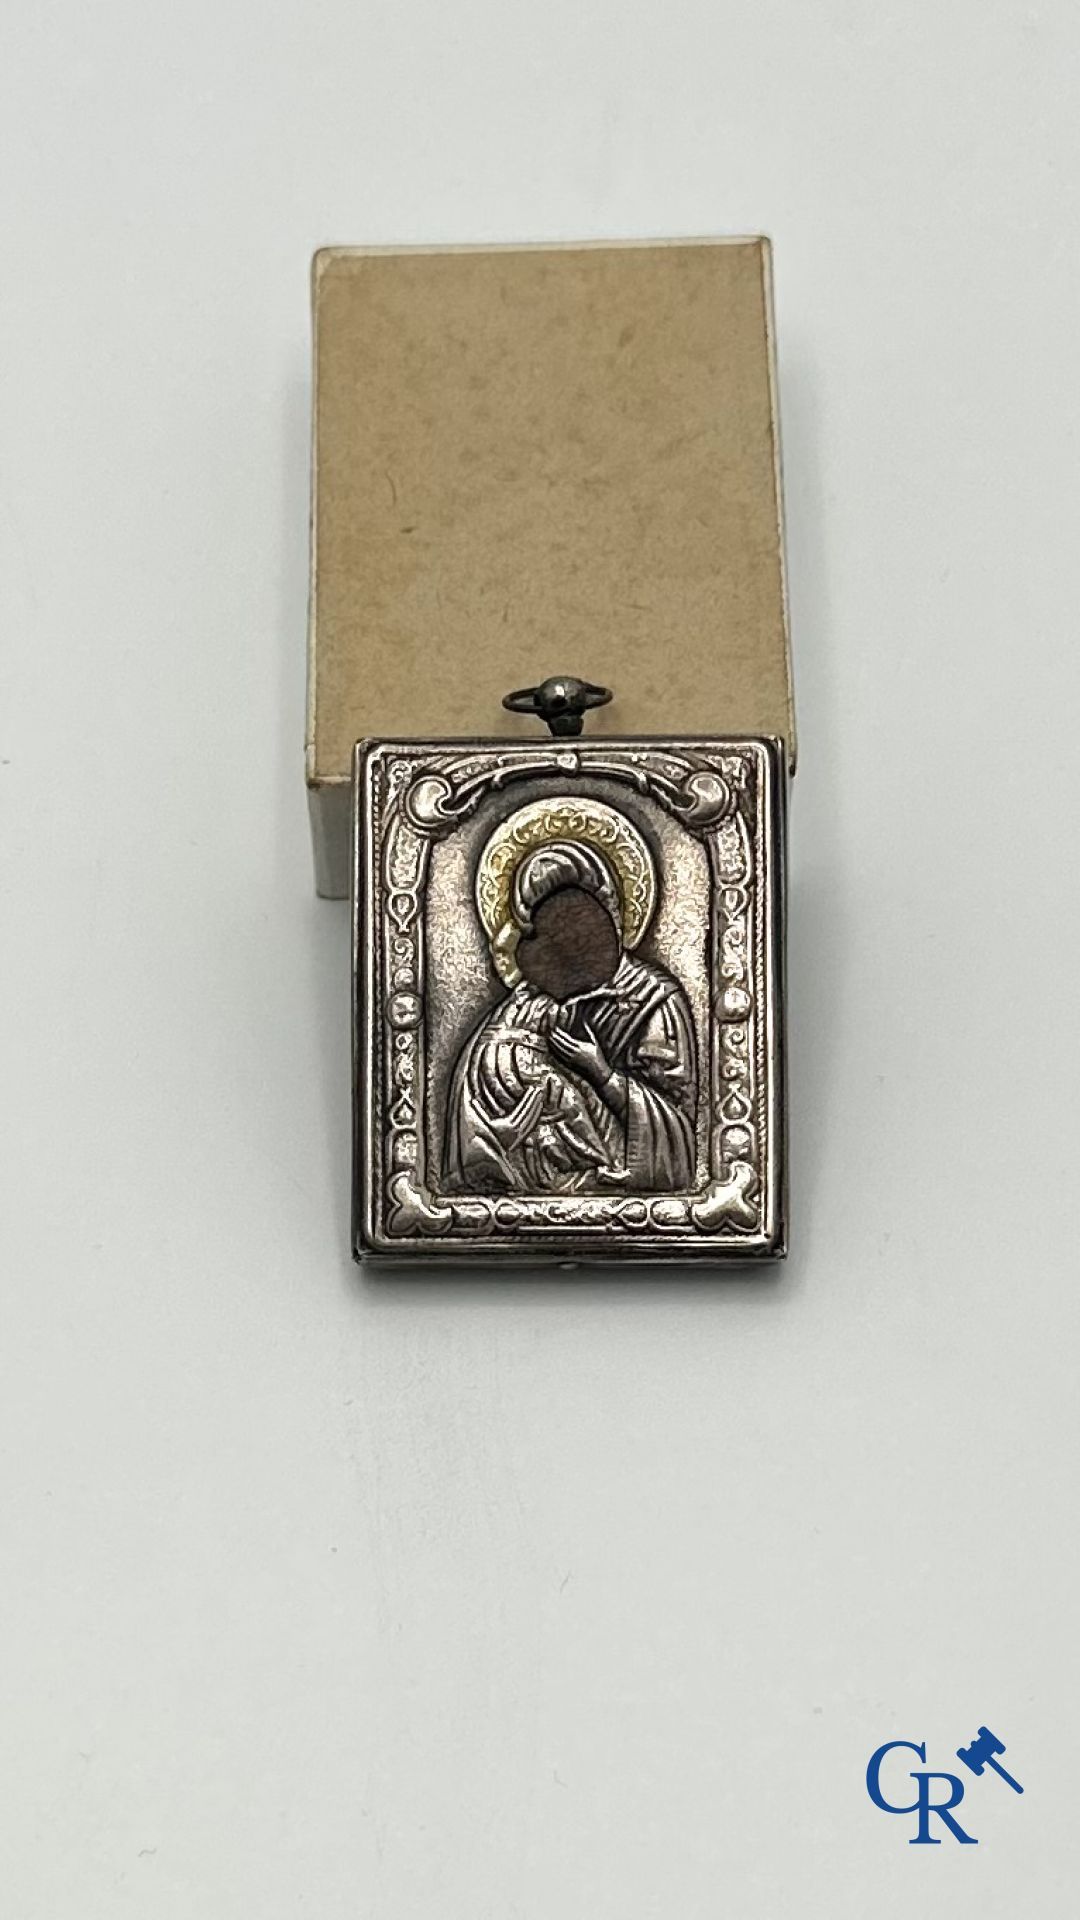 Jewellery-silver: Russian work: Caucasian belt in silver and pendant with icon in silver. - Image 3 of 3